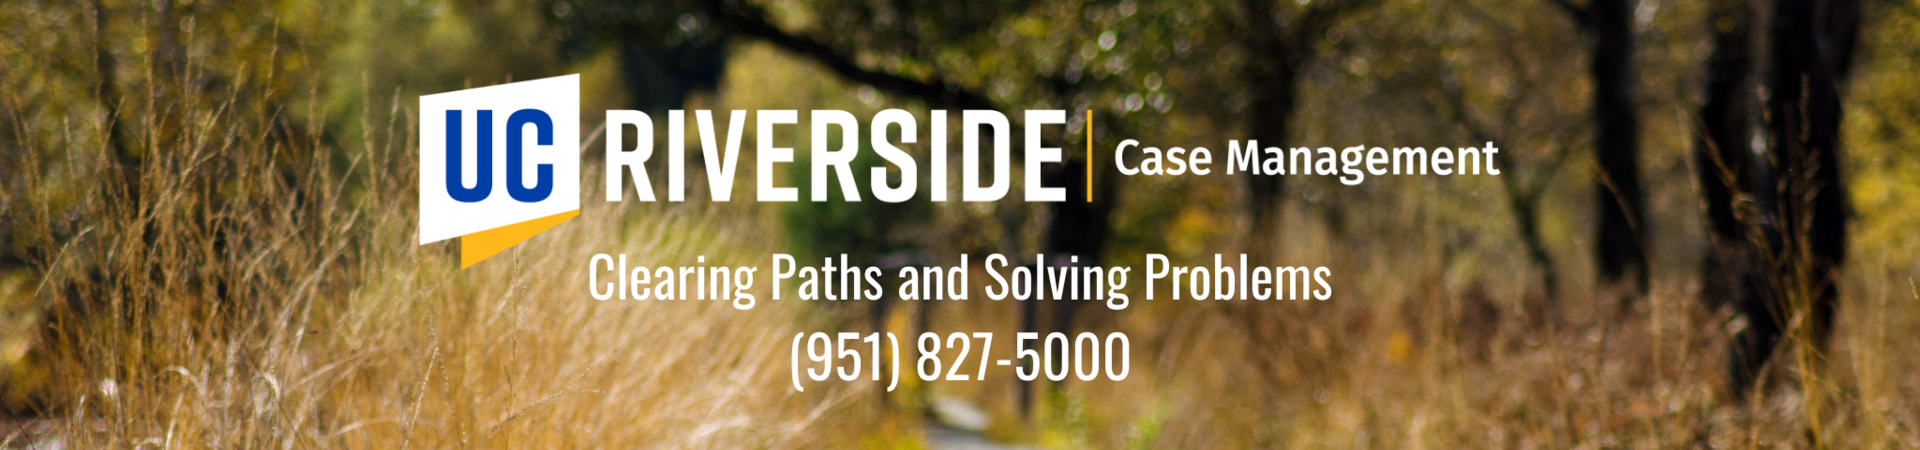 UC Riverside Case Management 	Clearing Paths and Solving Problems (951) 827-5000